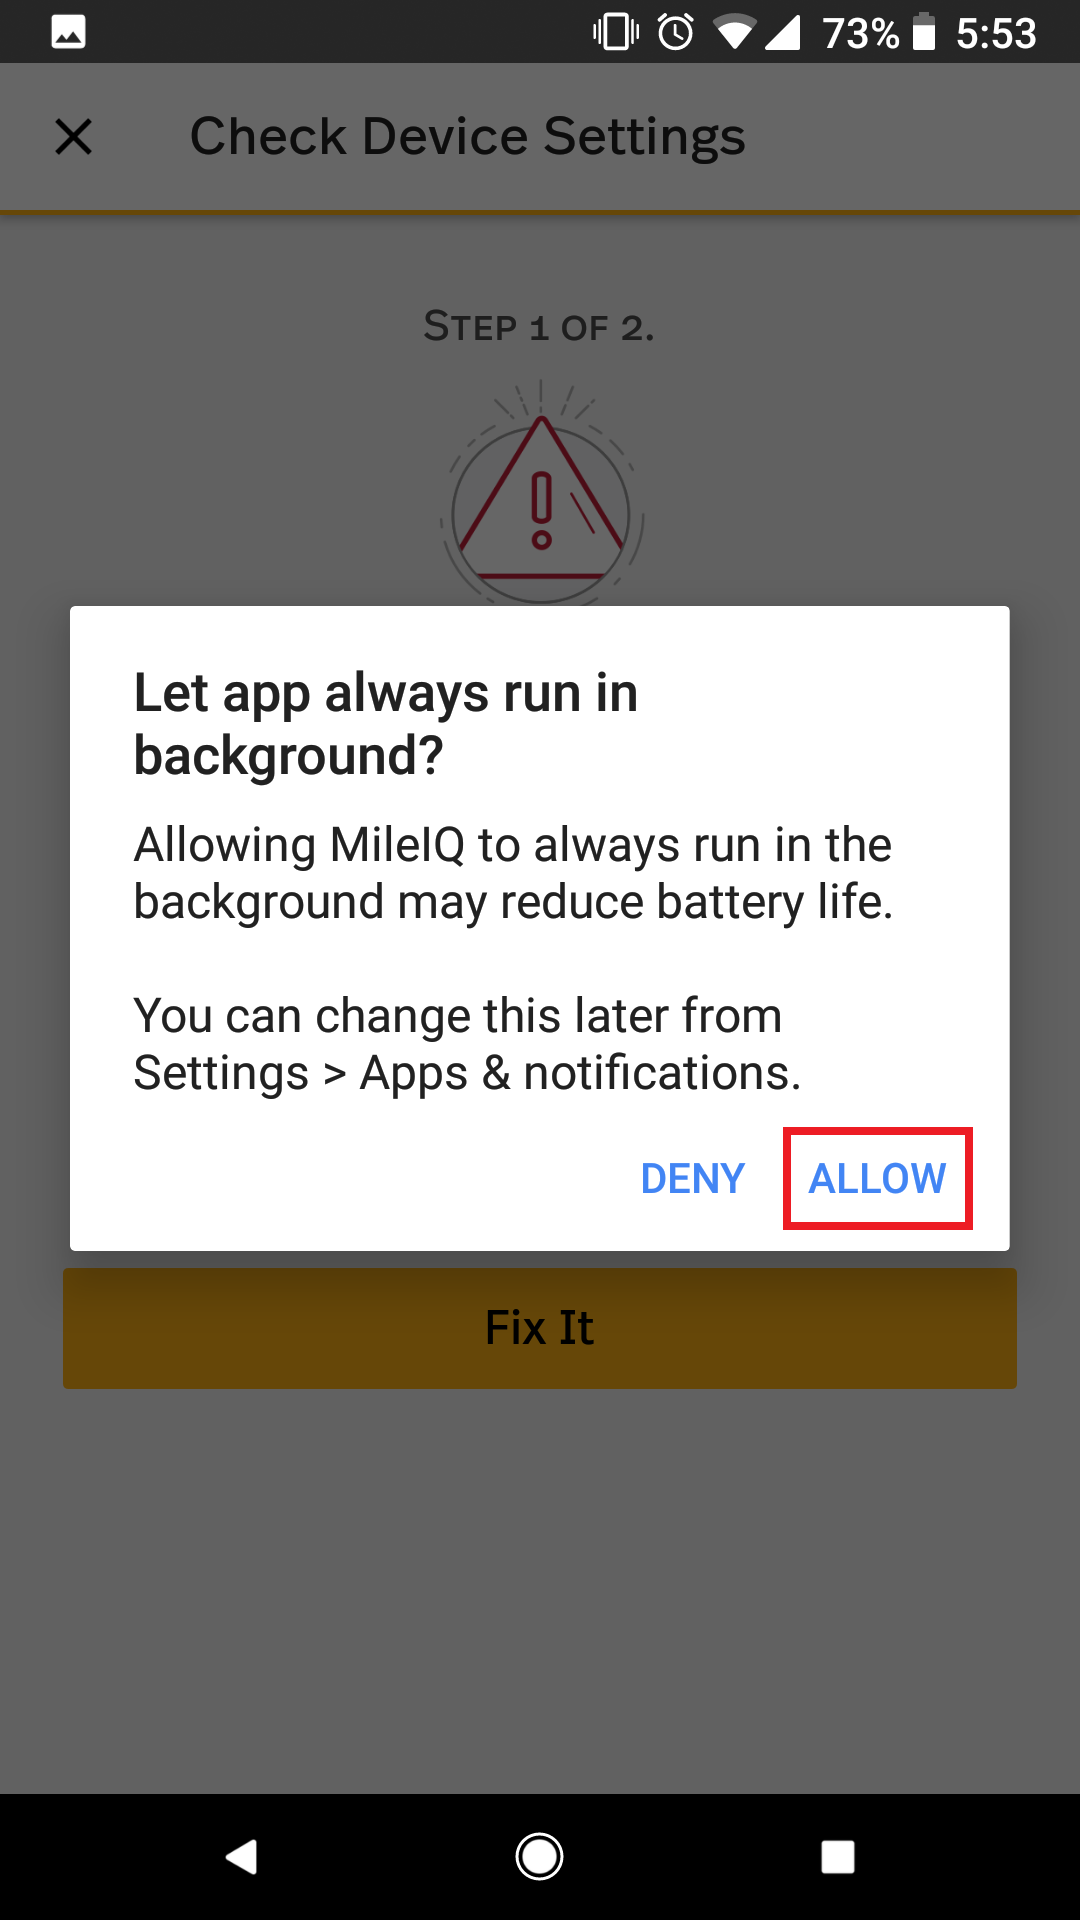 This shows tapping 'Allow' to optimize this setting for drive detection